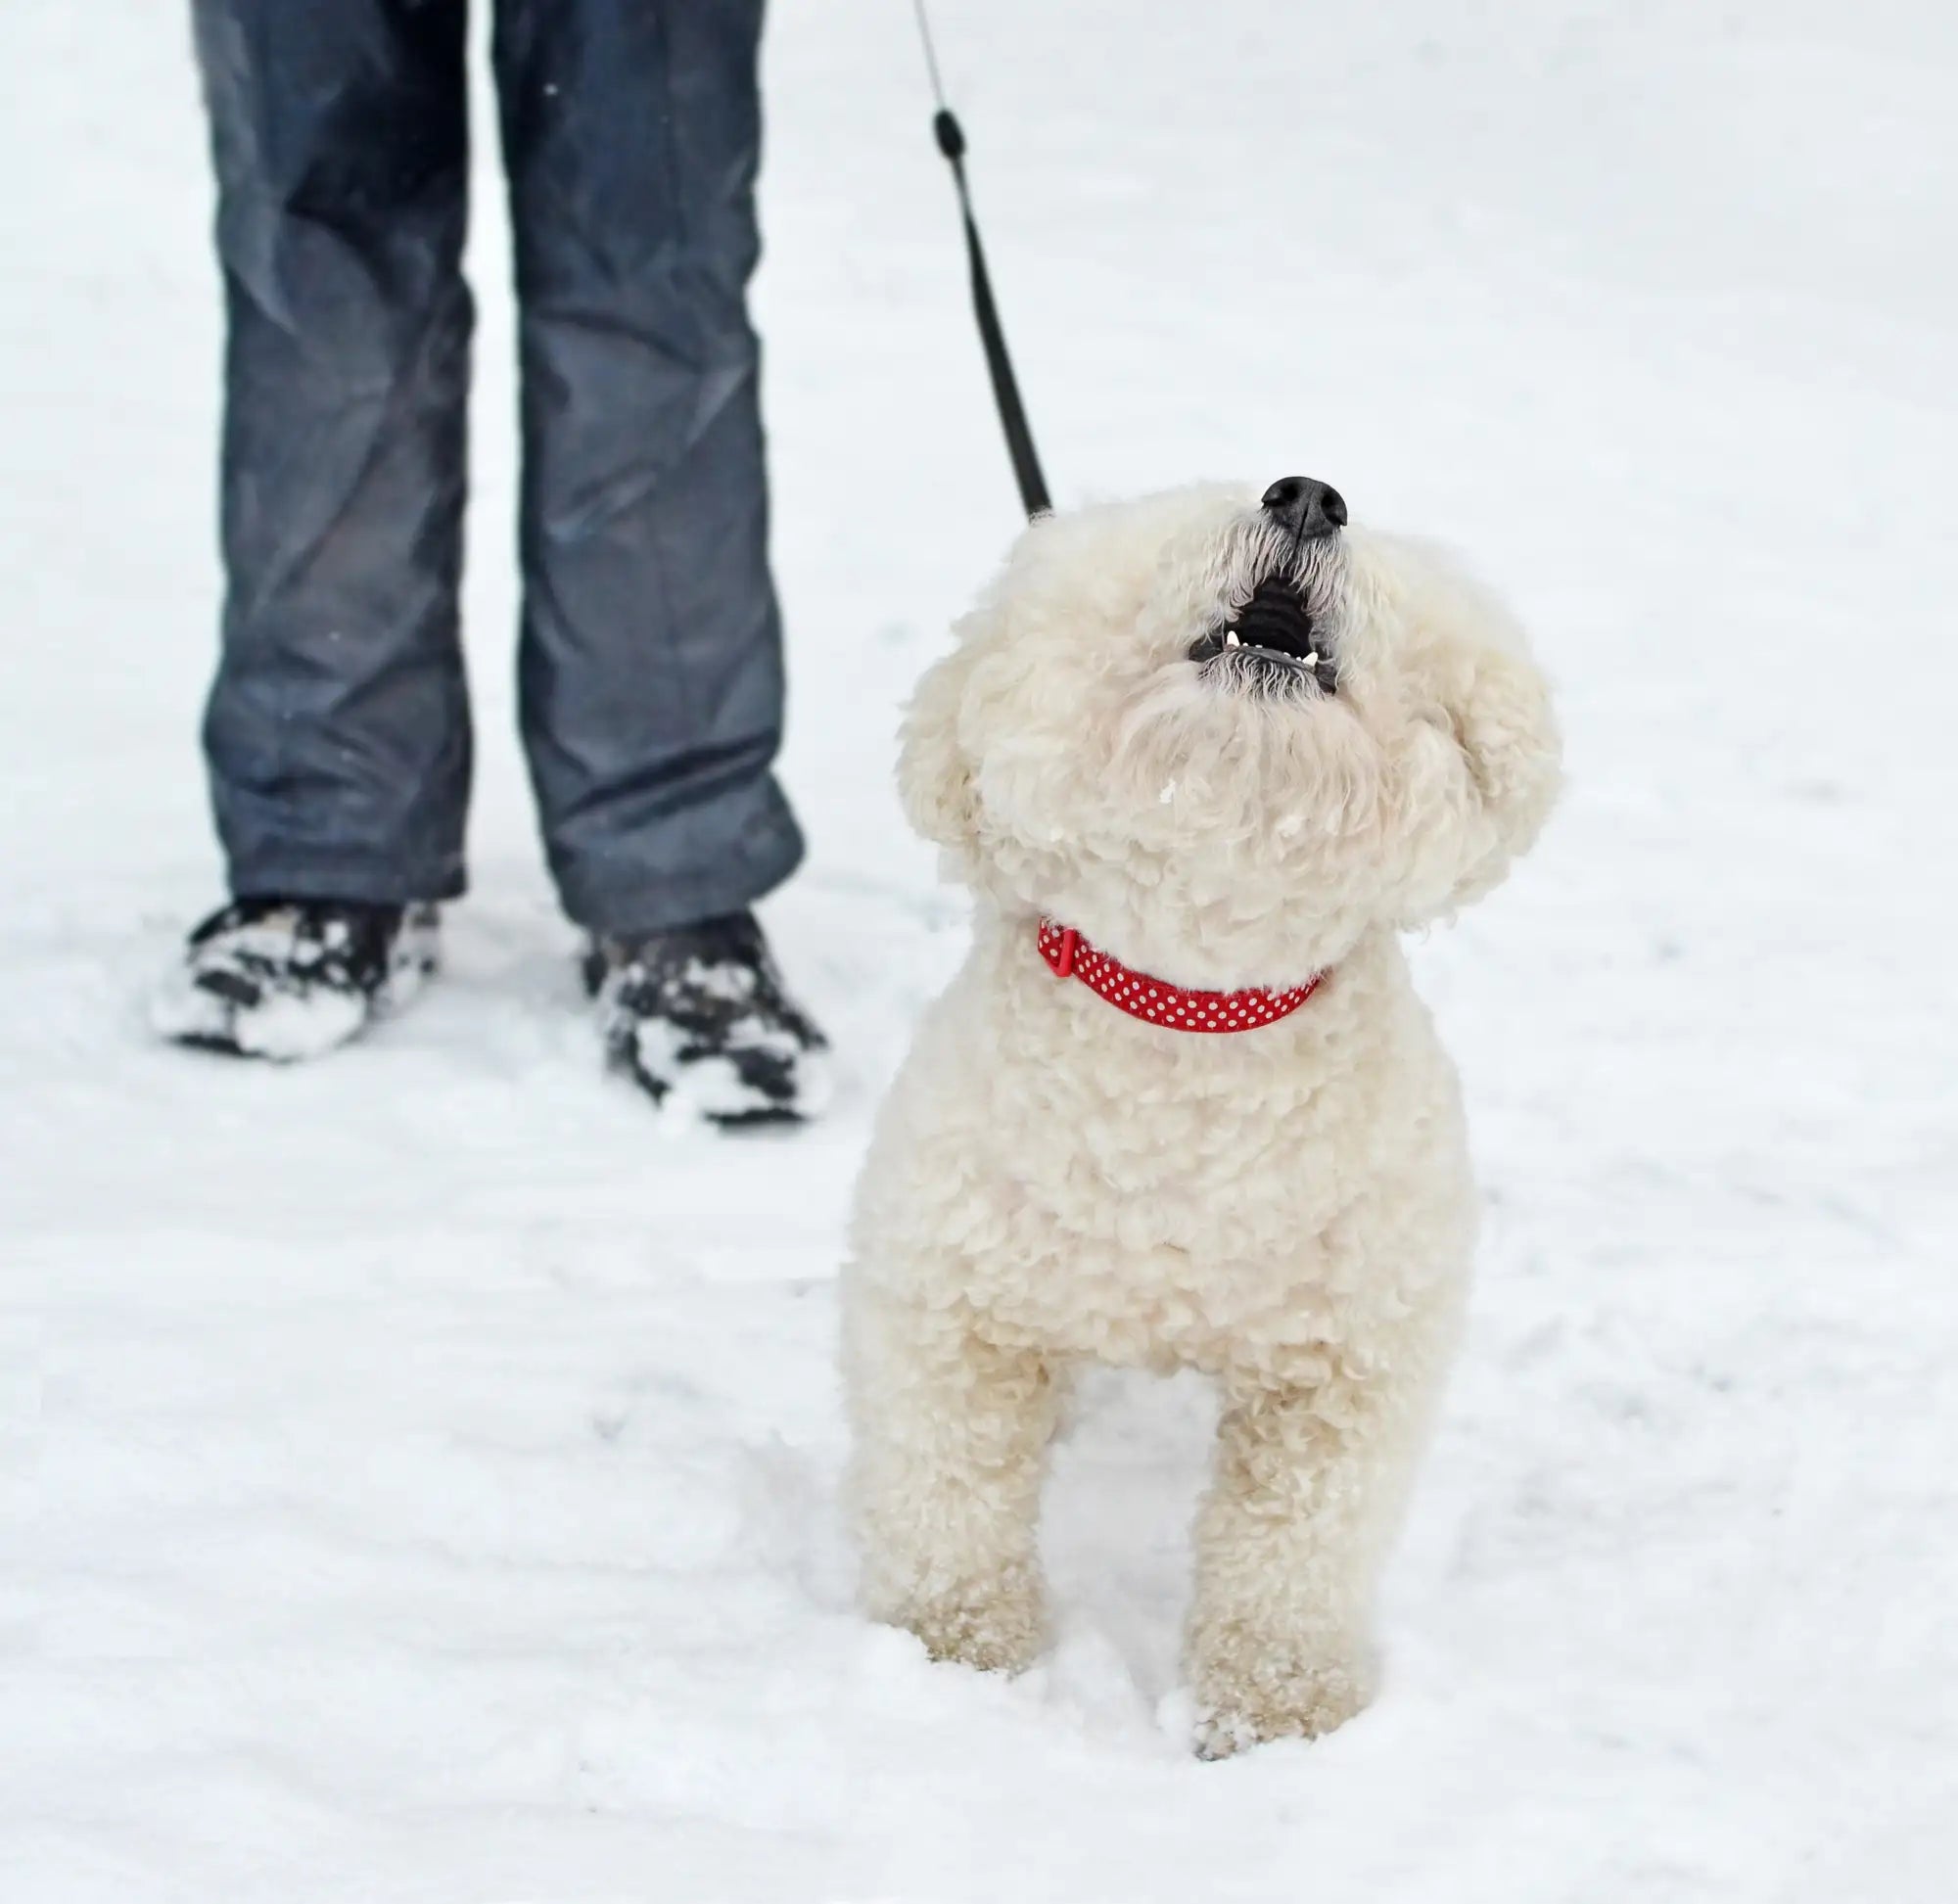 white fluffy dog looking up and barking with owner holding him on leash both standing in snow